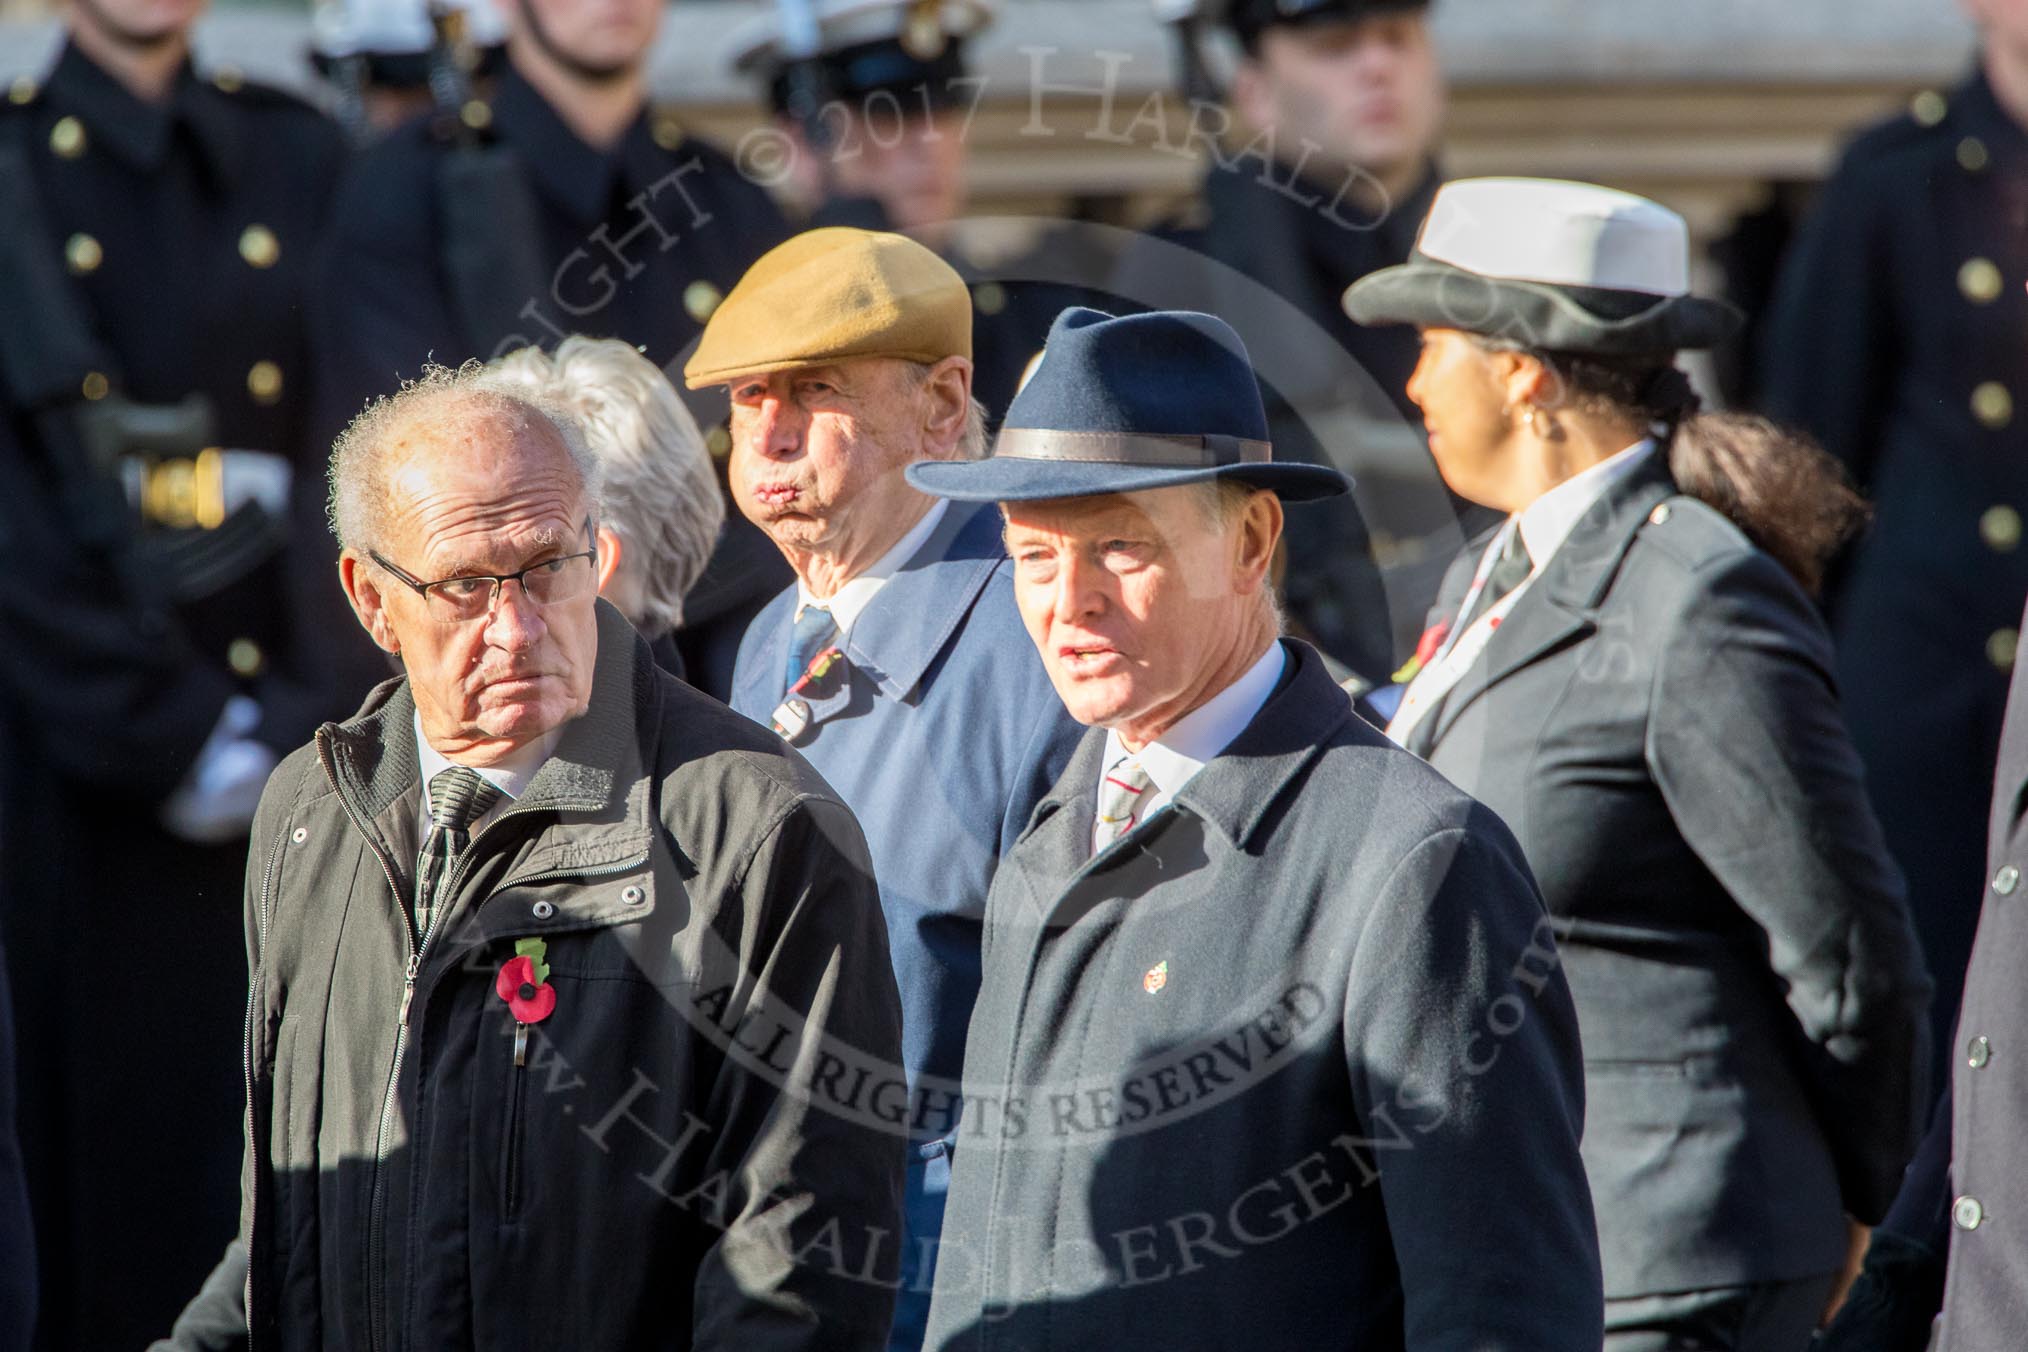 The British Resistance - Coleshill Auxiliary Research Team (Group D25, 14 members) during the Royal British Legion March Past on Remembrance Sunday at the Cenotaph, Whitehall, Westminster, London, 11 November 2018, 12:24.